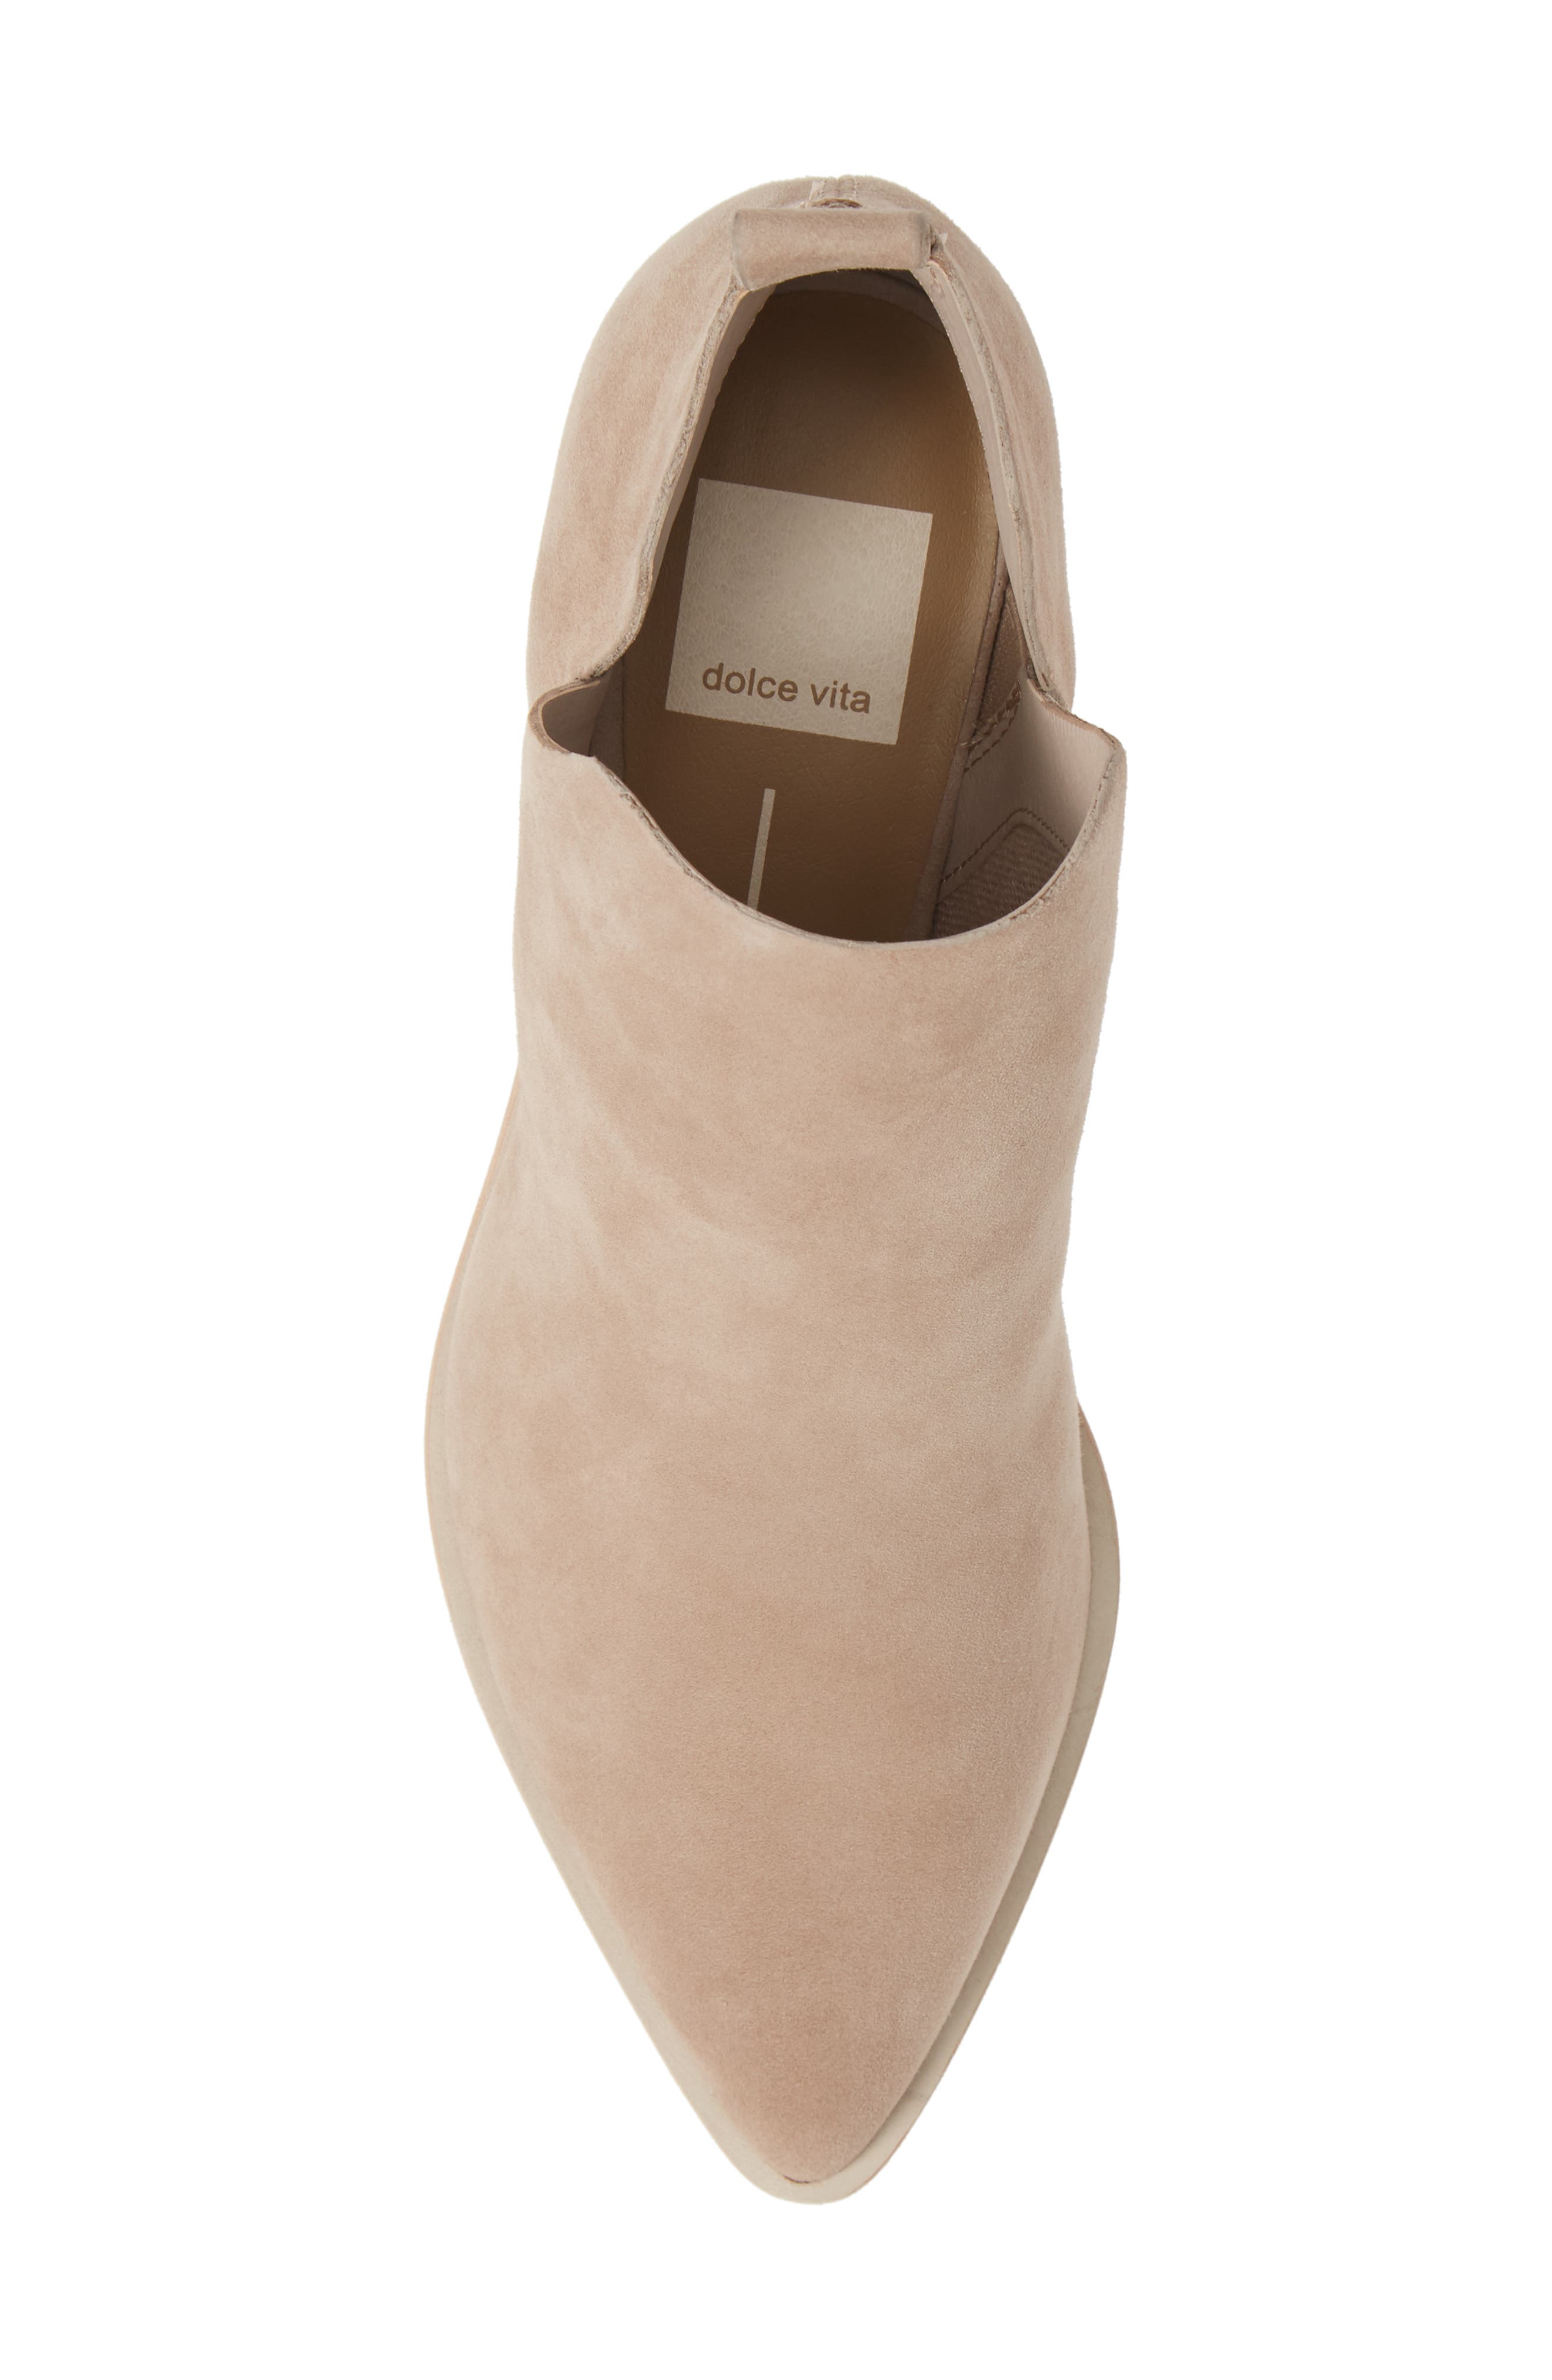 dolce vita sonni pointy toe bootie